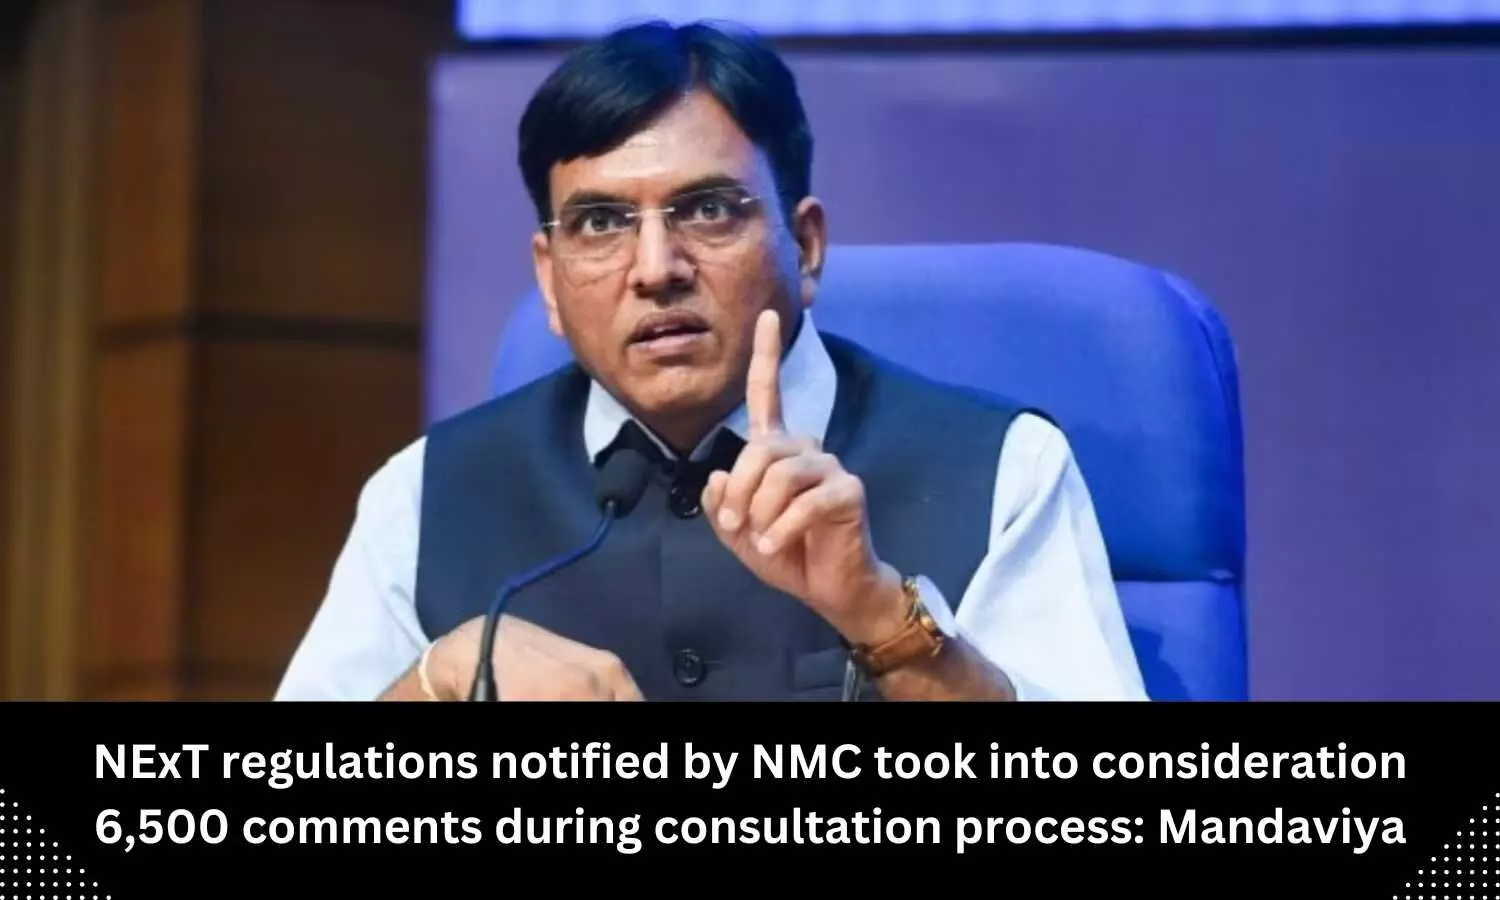 NExT regulations notified by NMC took into consideration 6,500 comments during consultation process: Mansukh Mandaviya